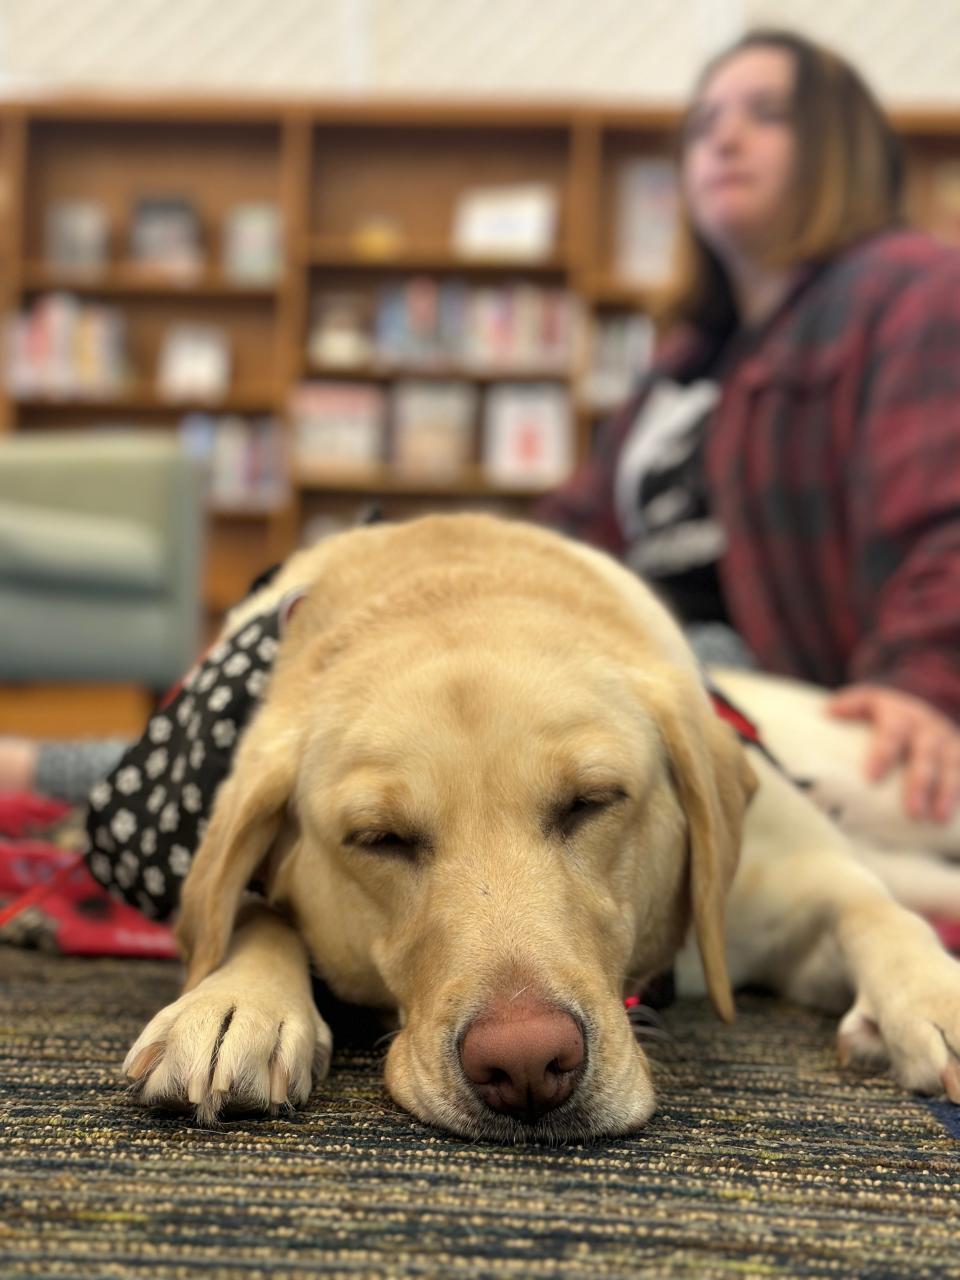 Therapy dogs Parker and Lootah, along with trainers Cathy and Cindy, will be at Tales and Tails storytime at the Cheboygan Library at 10:15 a.m. Tuesday, March 26, in the children’s room.